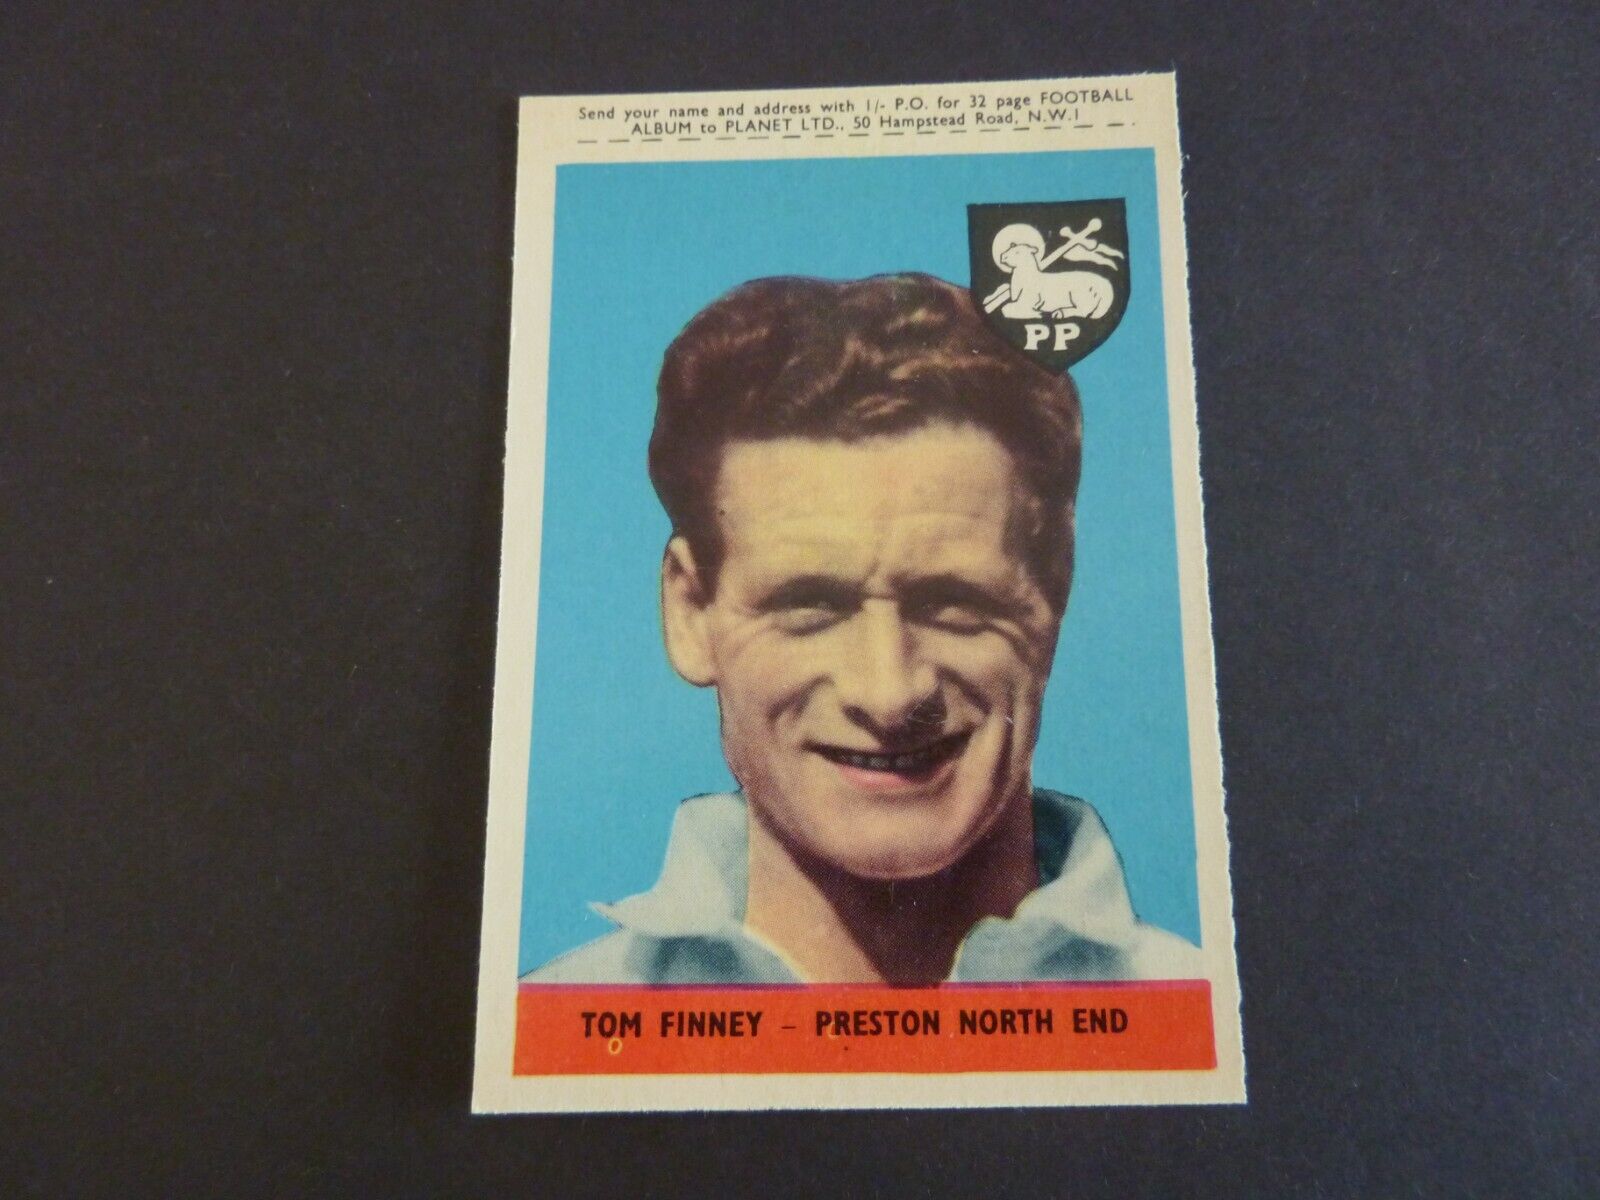 Tom Finney A&BC Football Card from 1958 - With Planet - Very Good Condition